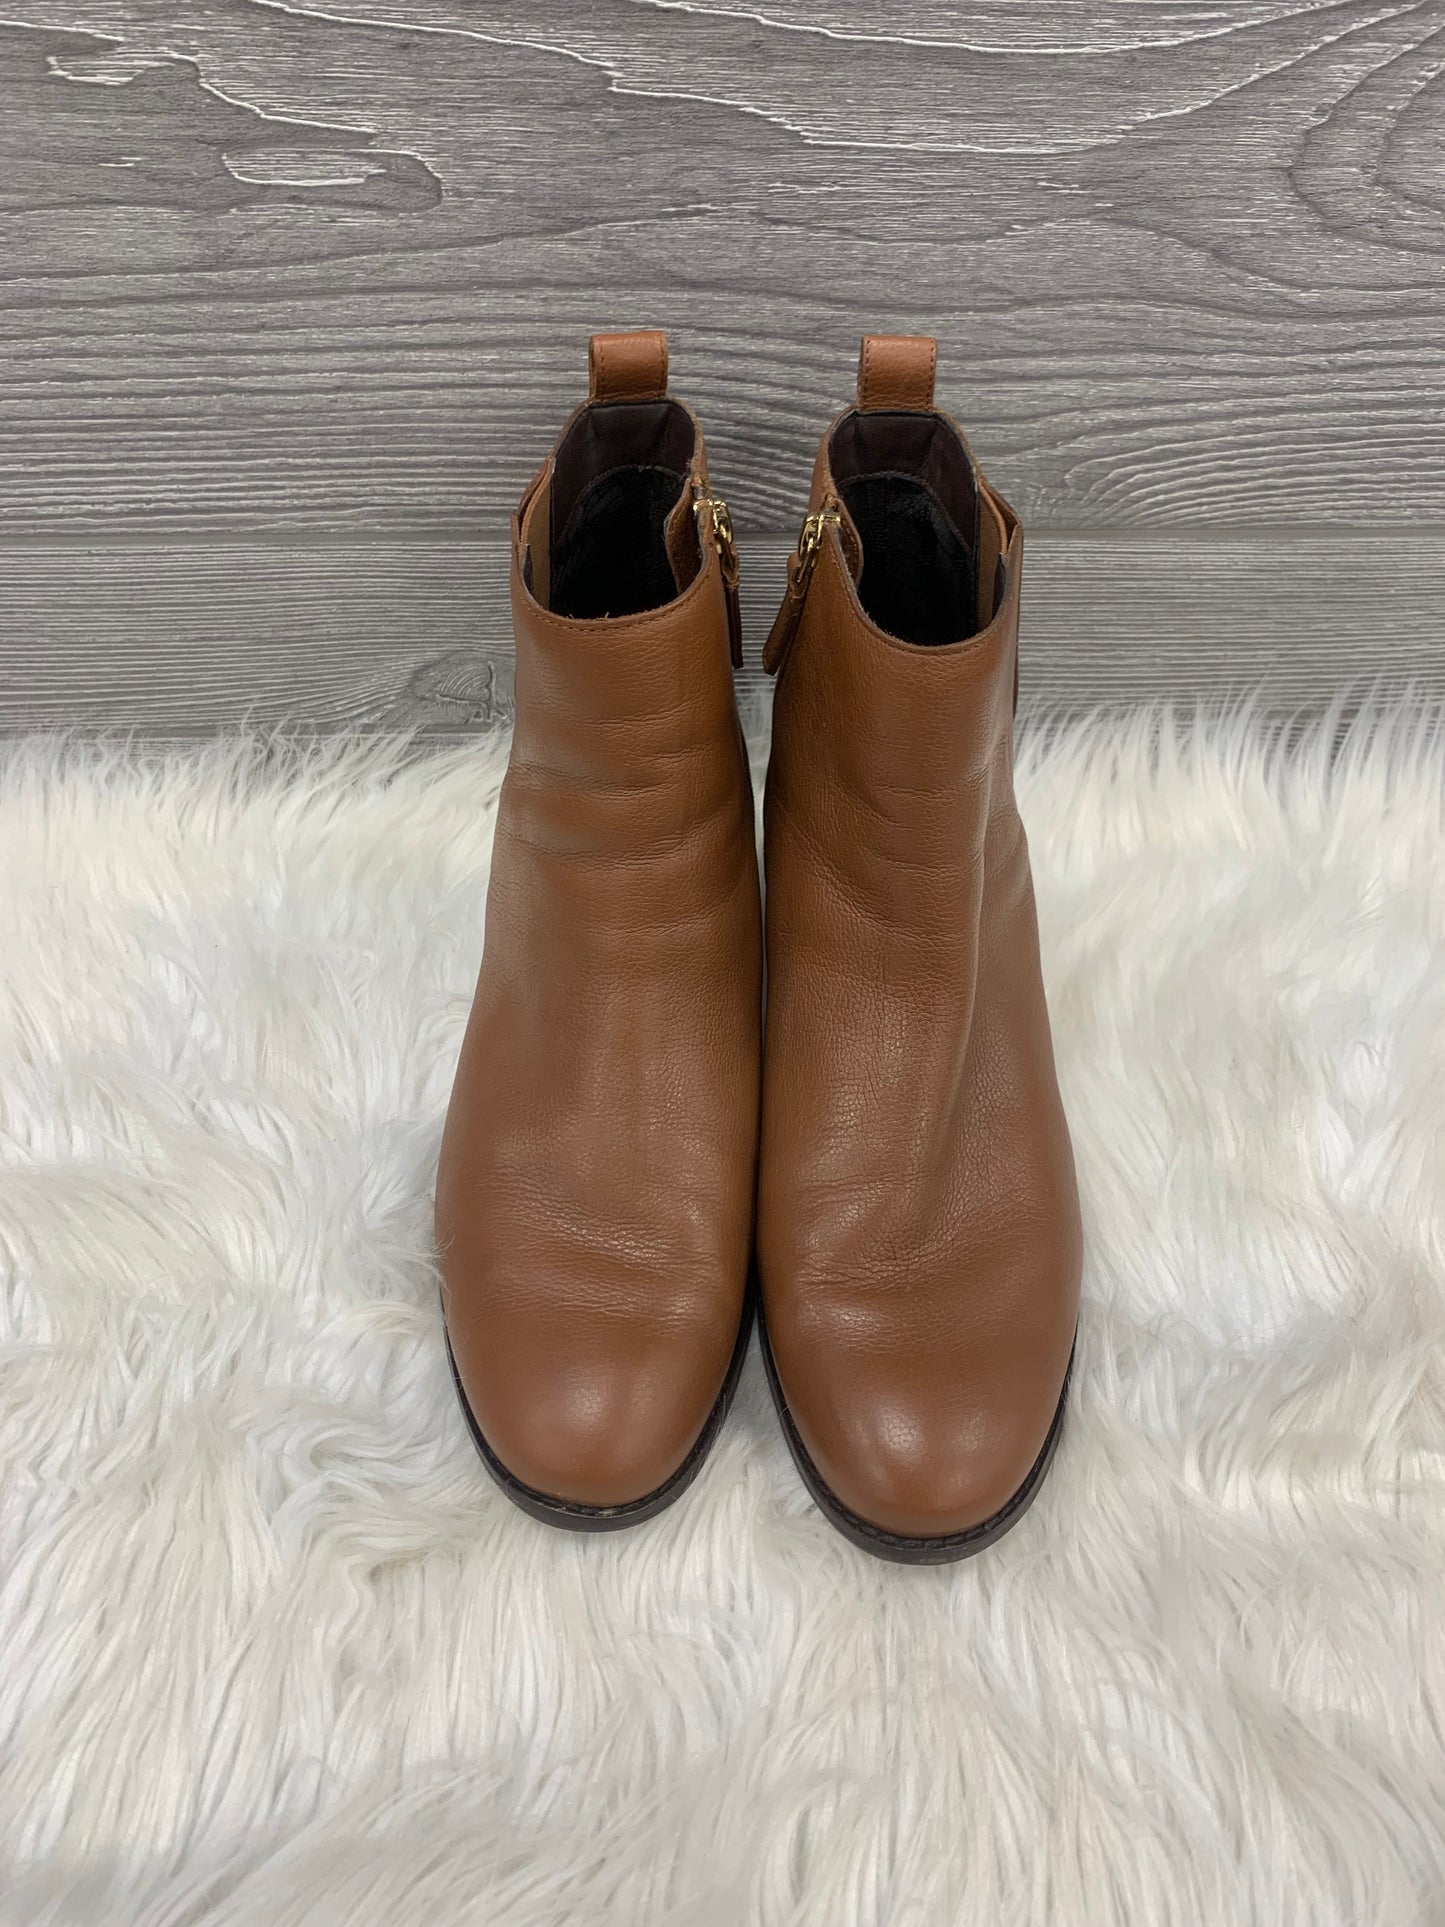 Boots Designer By Cole-haan  Size: 9.5